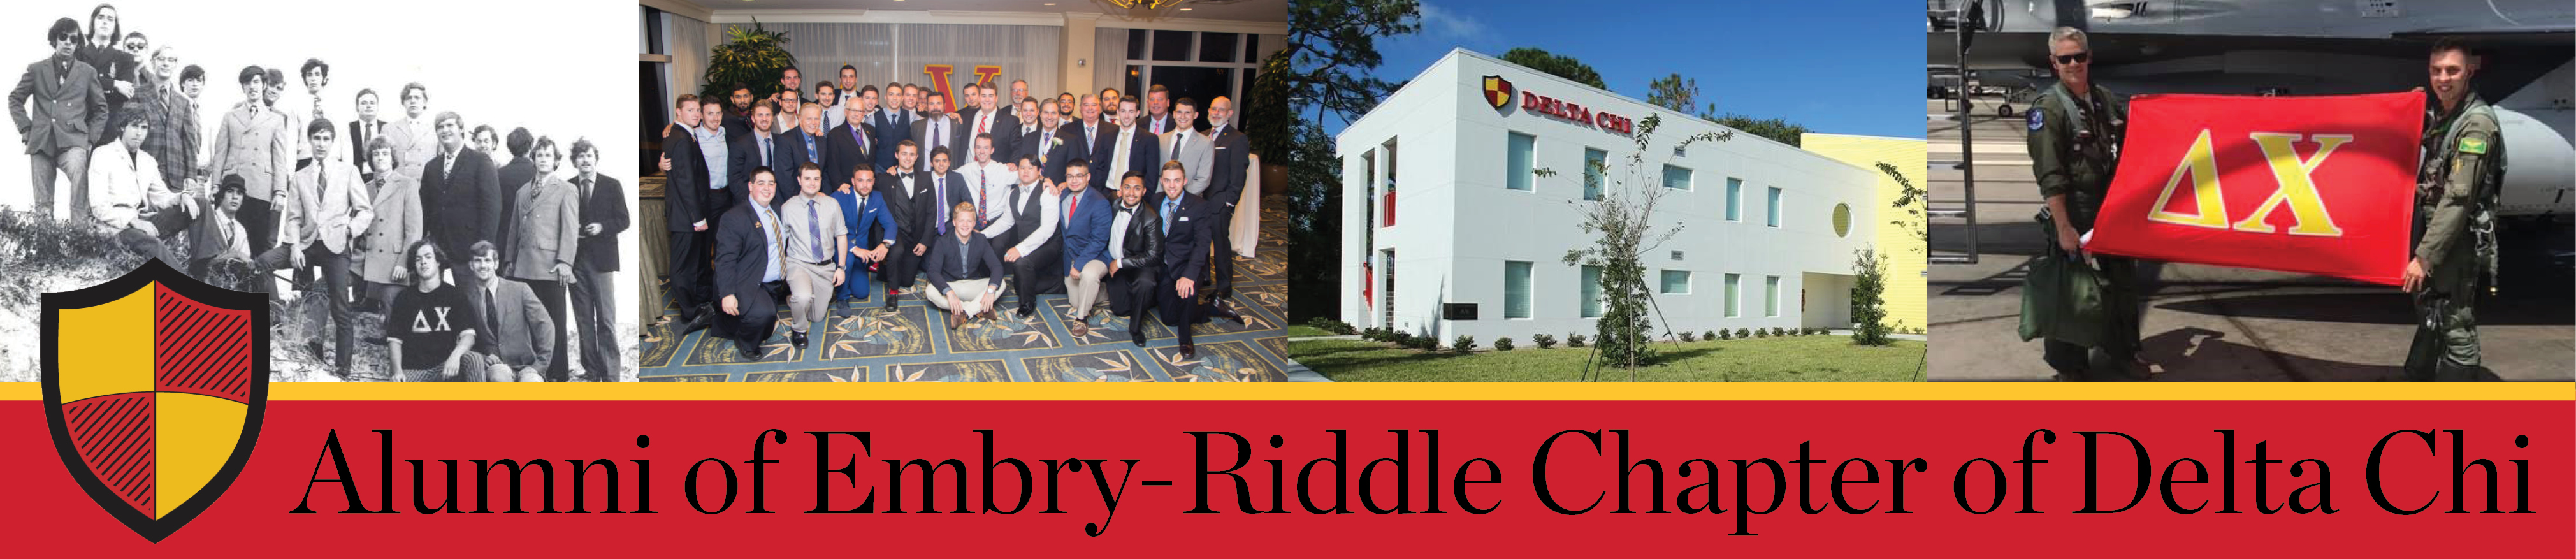 Embry-Riddle Chapter of the Delta Chi Fraternity